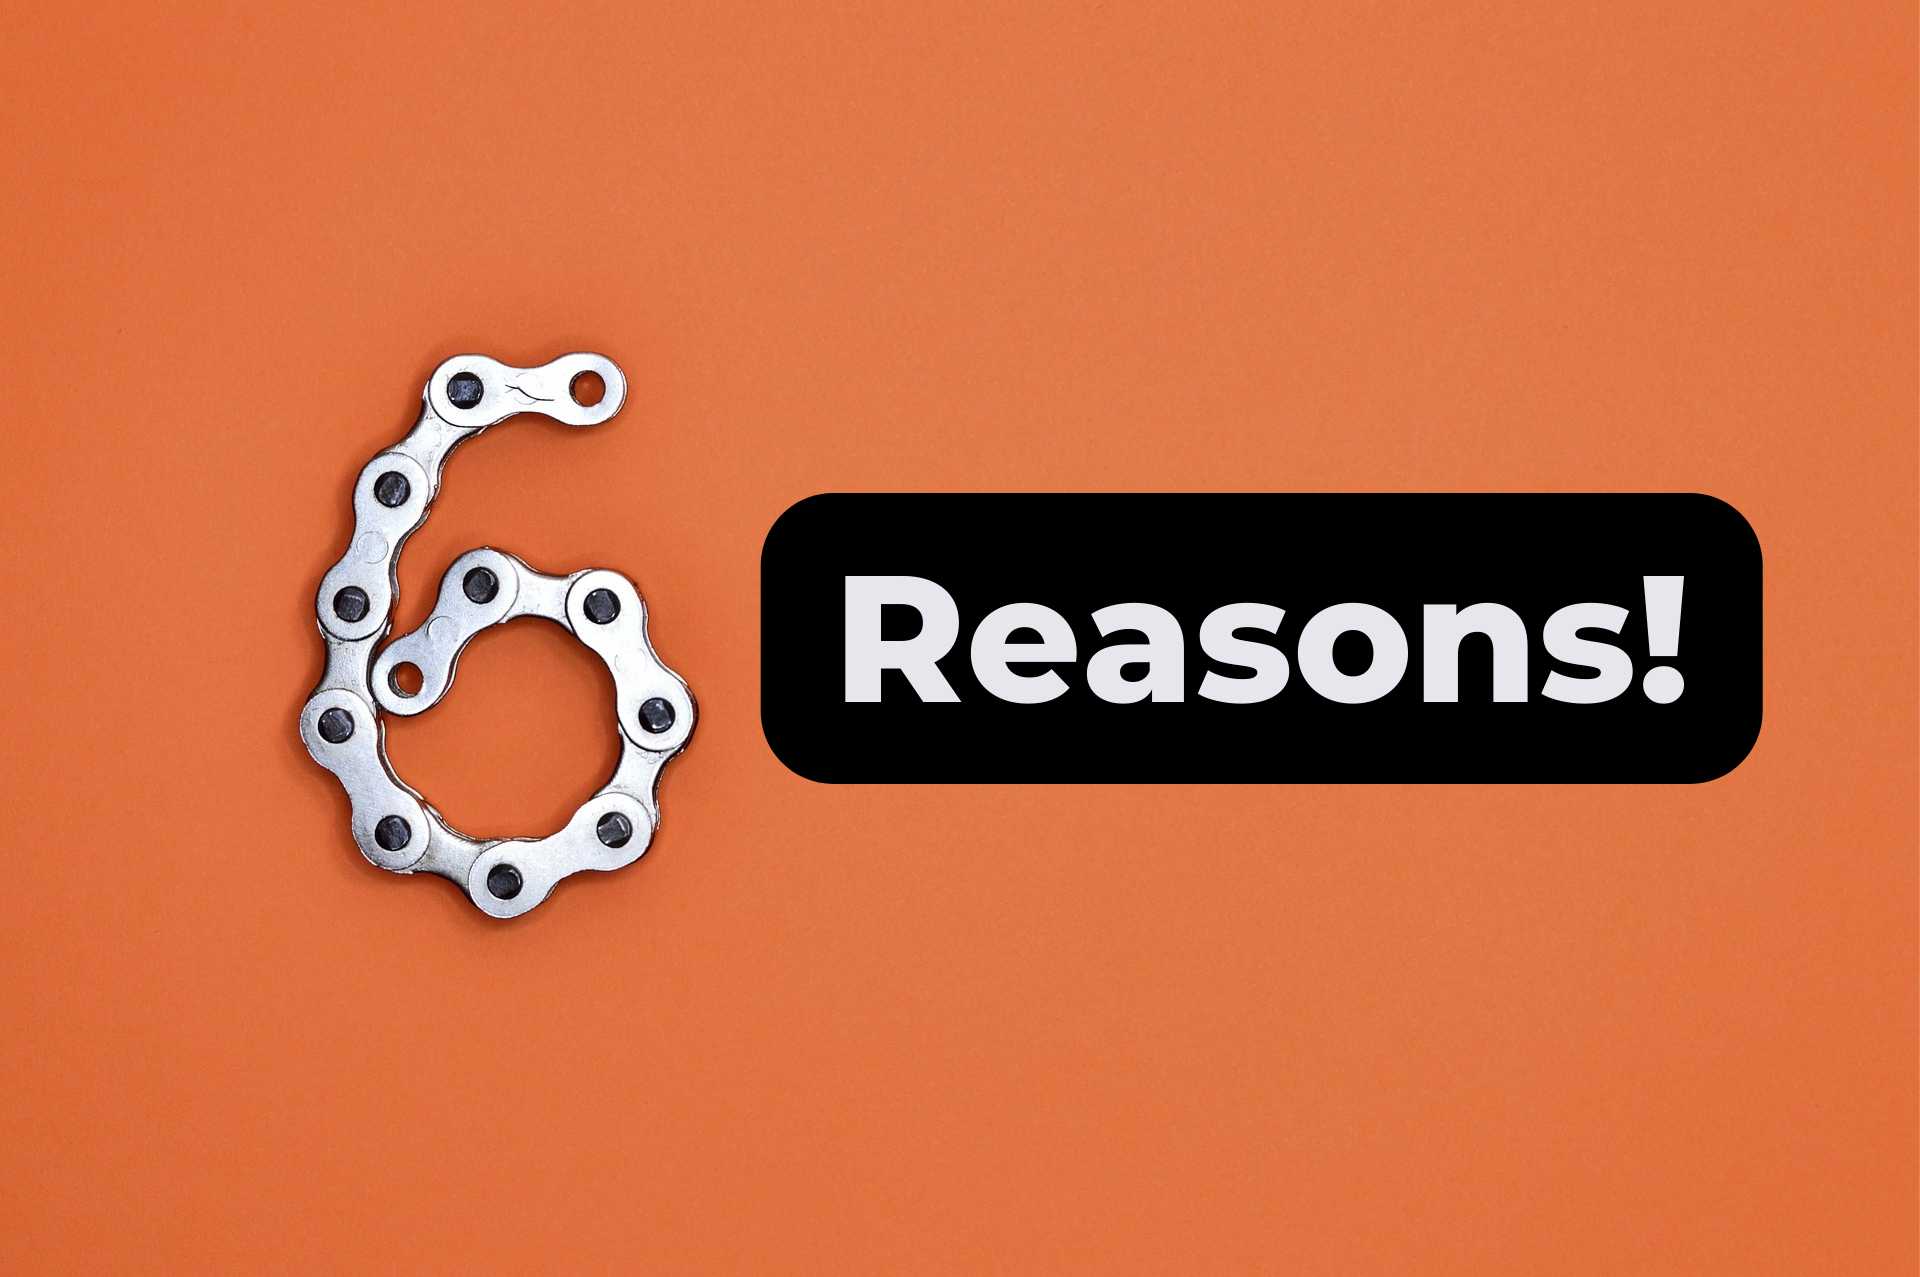 A bike chain forming the number six next to the word "Reasons!".  Credit padrinan on pixabay